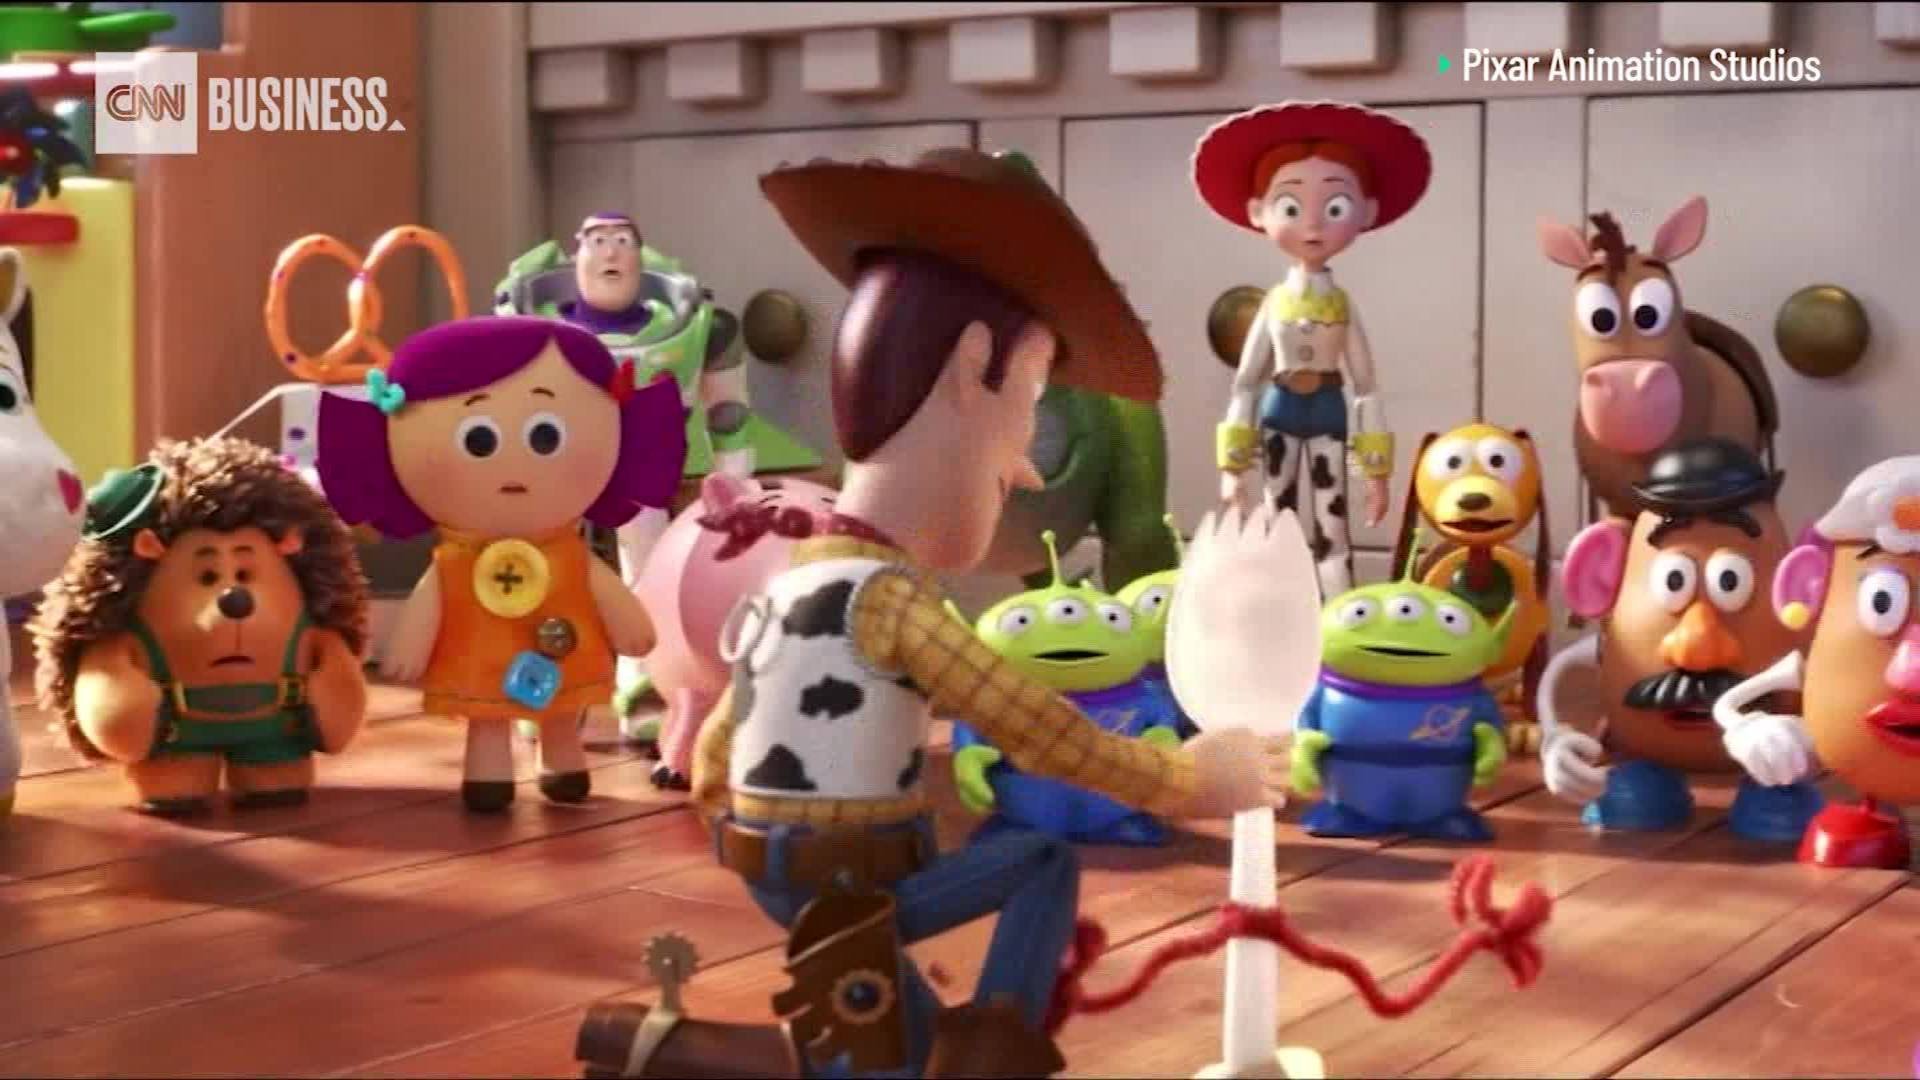 Keanu Reeves voices new character in 'Toy Story 4' trailer ...